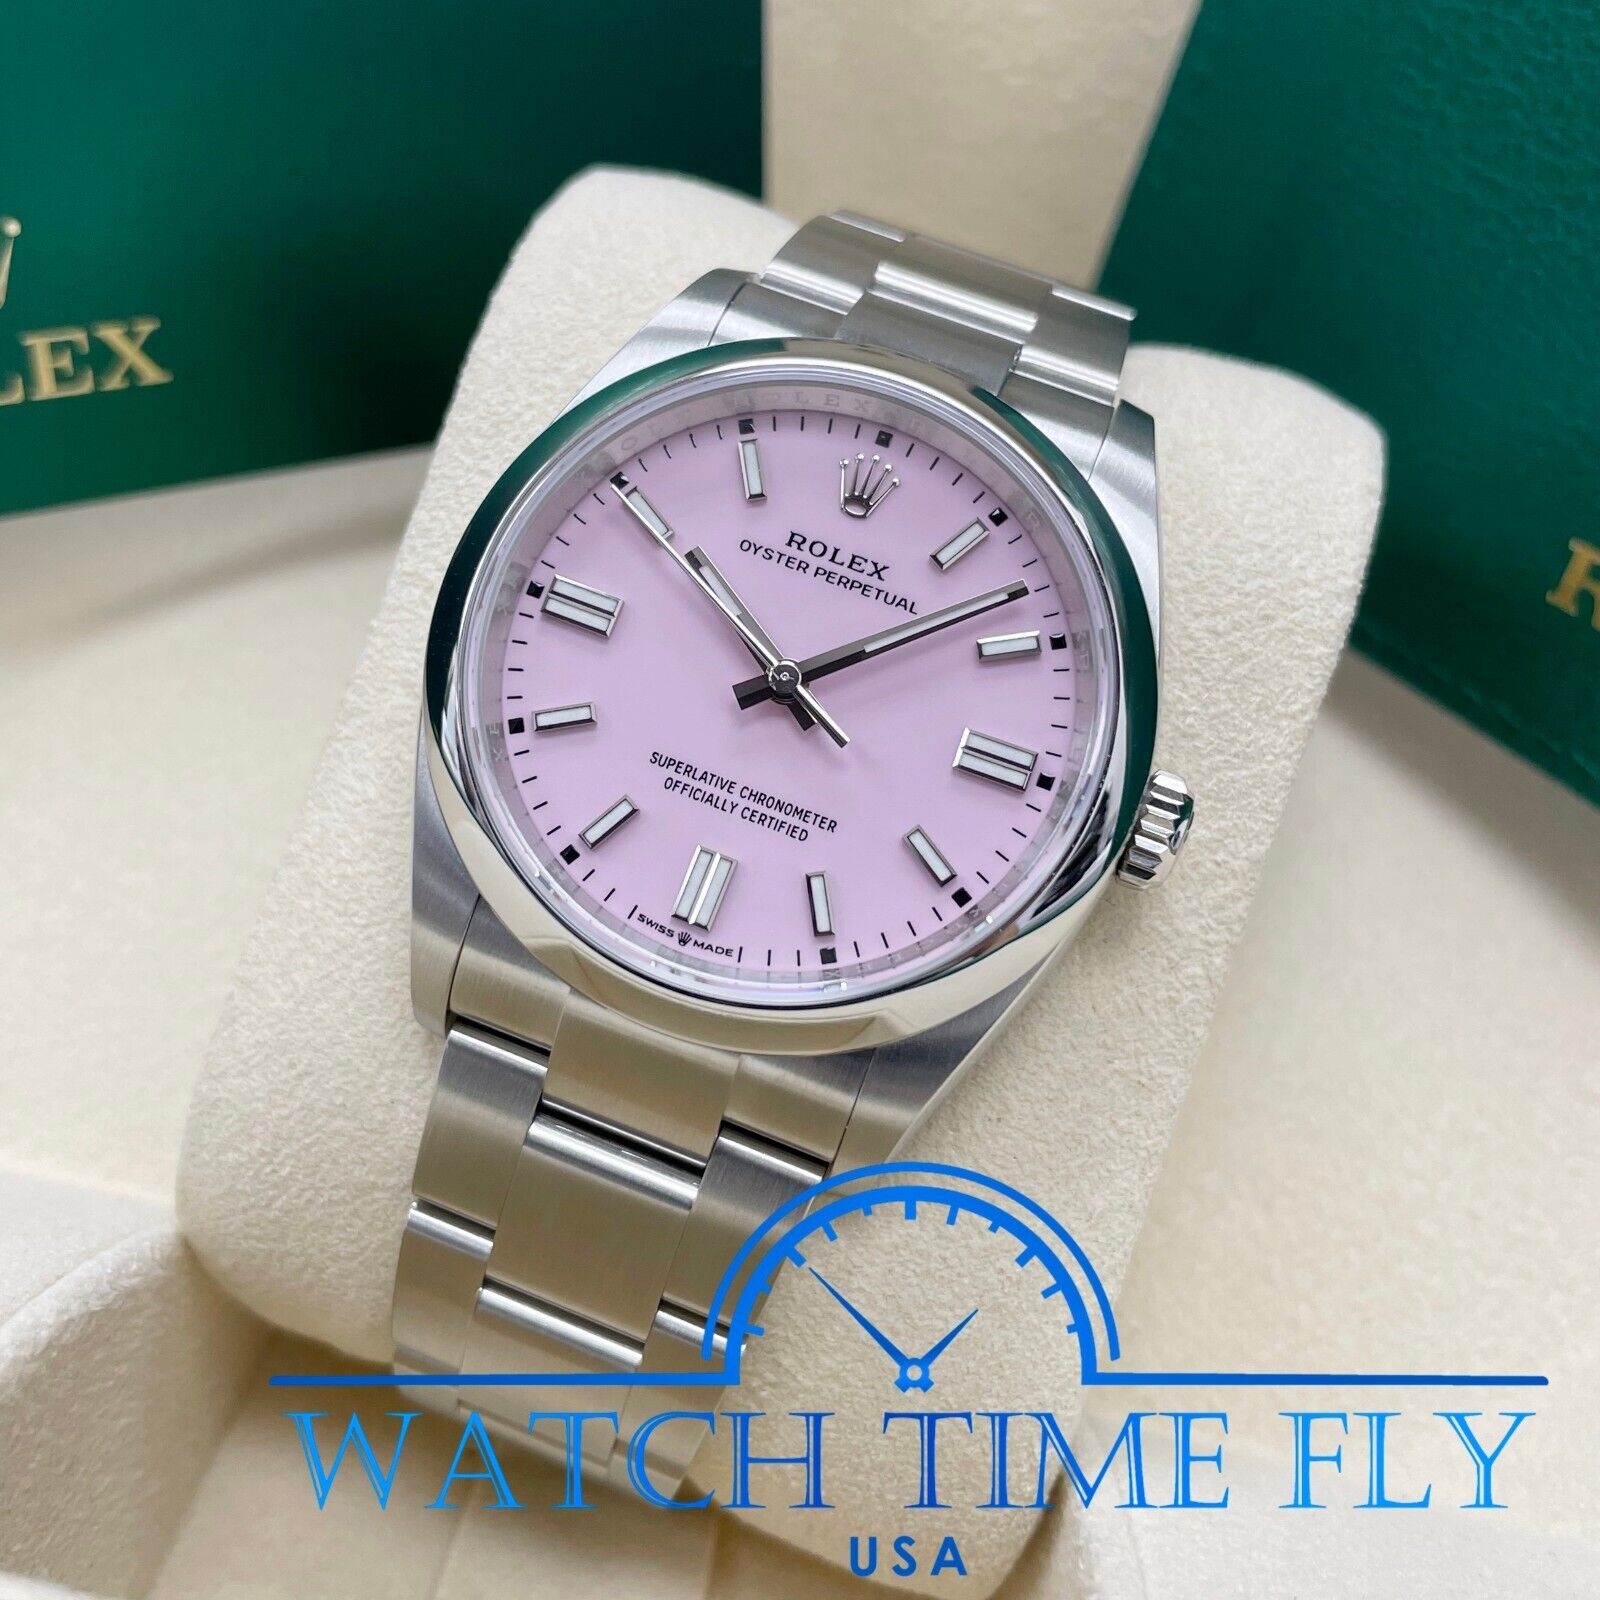 katran dubok Huh  Rolex Oyster Perpetual Candy Pink Women's Watch - m126000-0008 for sale  online | eBay